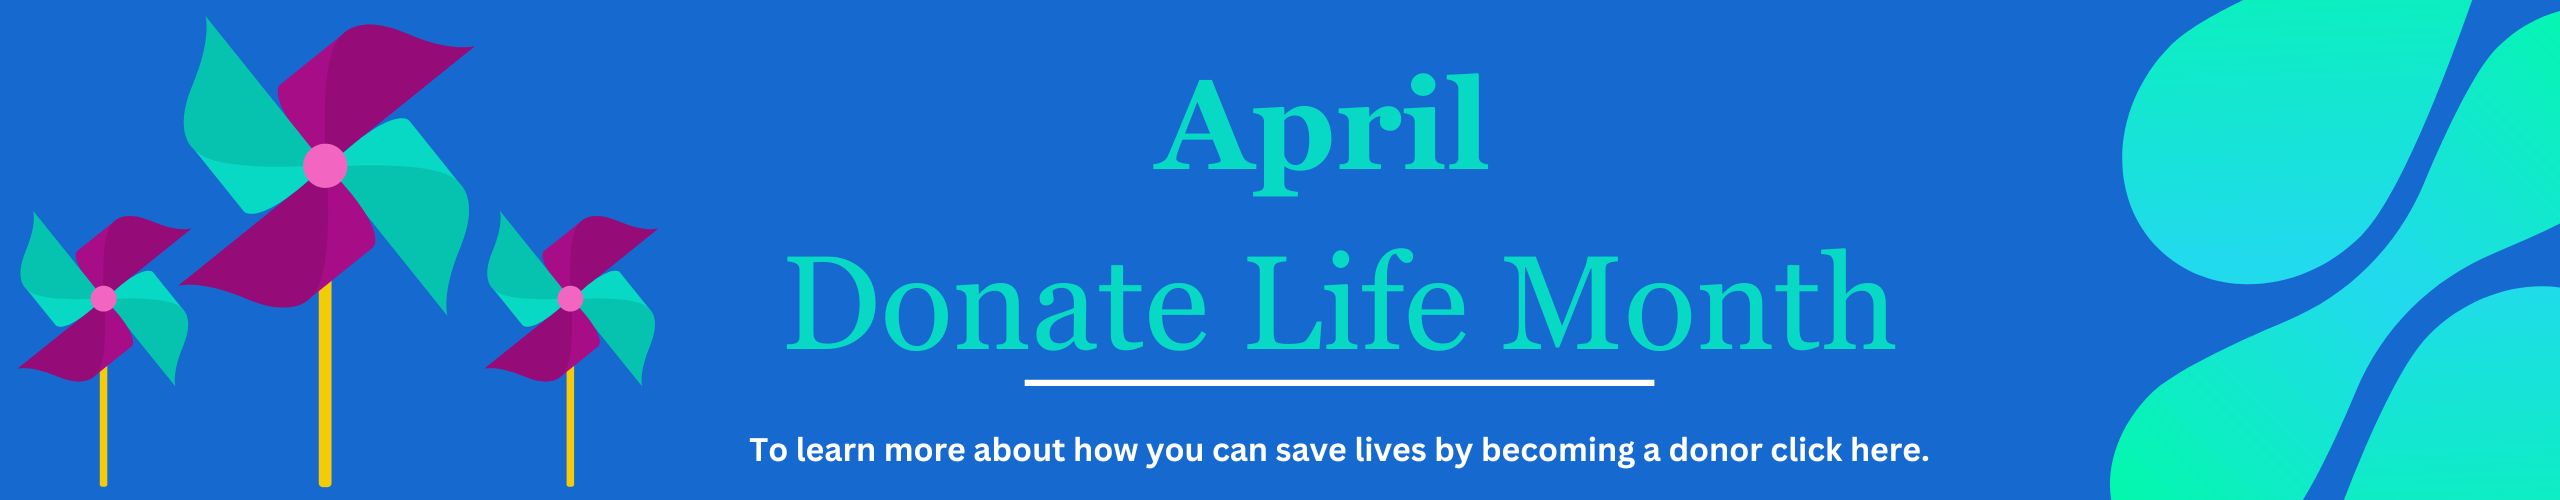 Donate life month